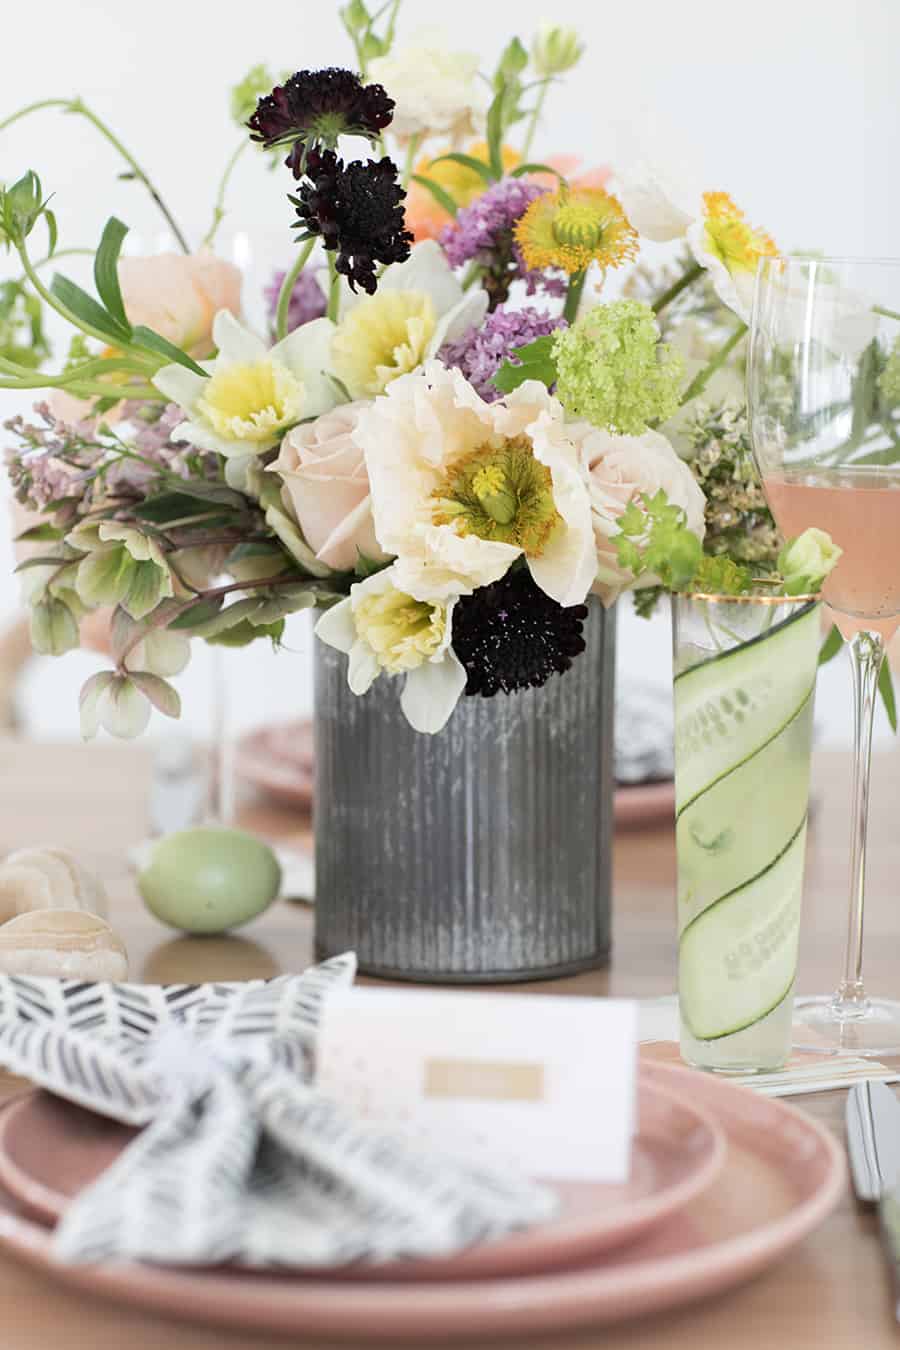 Colorful flowers in a galvanized vase on a table with a cucumber gimlet and Easter eggs.